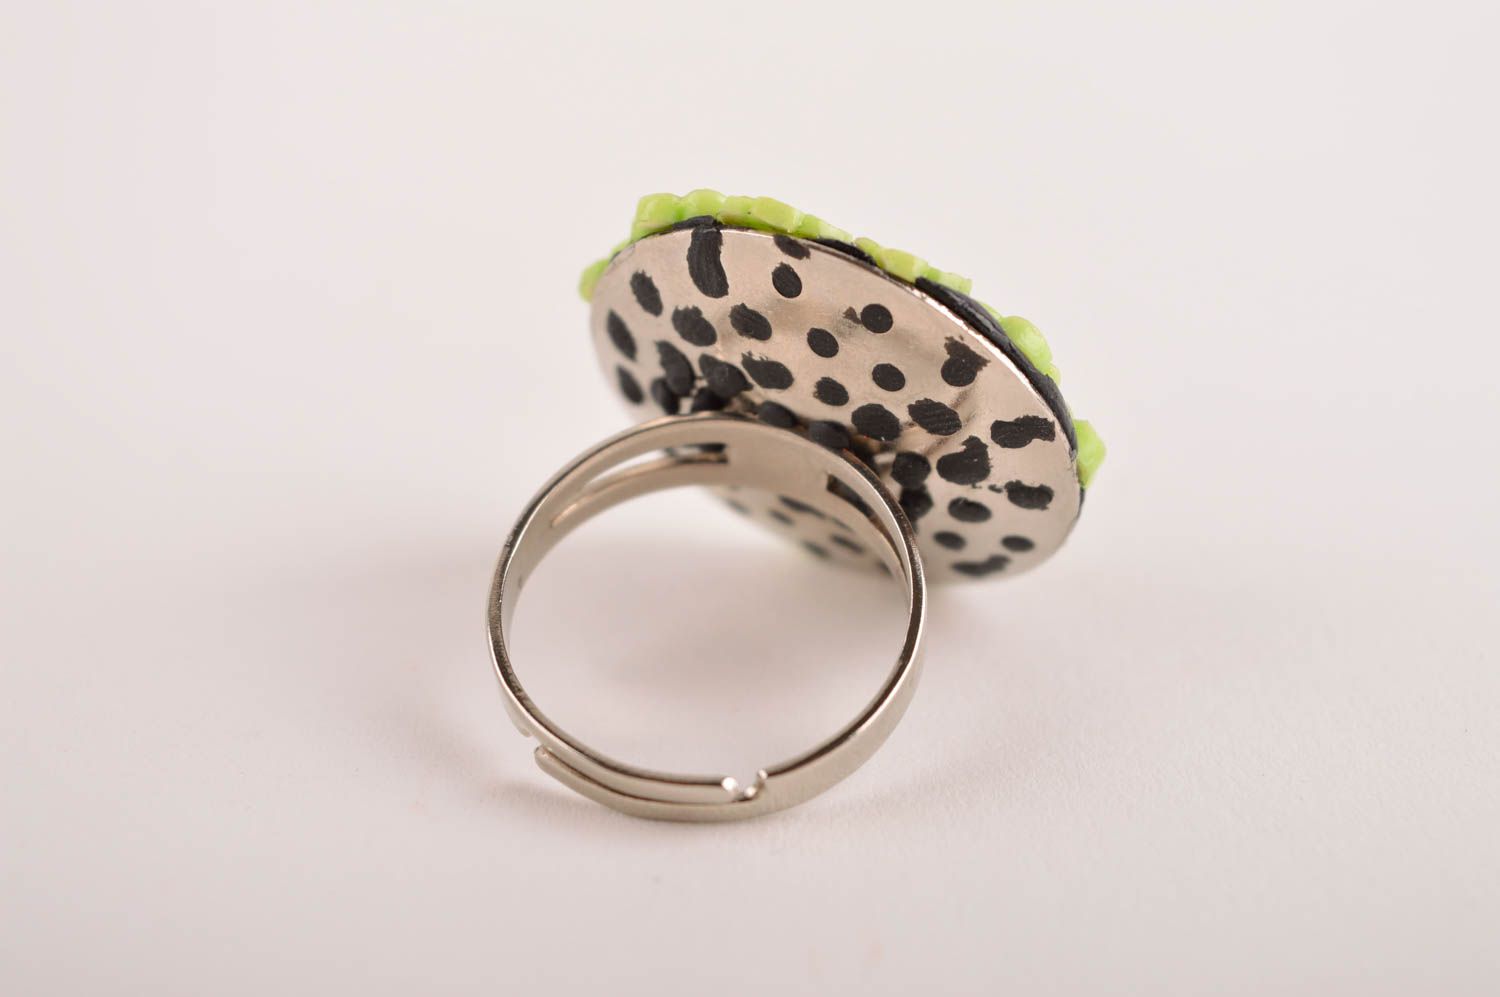 Handmade clay ring designer clay accessory unusual gift for women clay jewelry photo 4